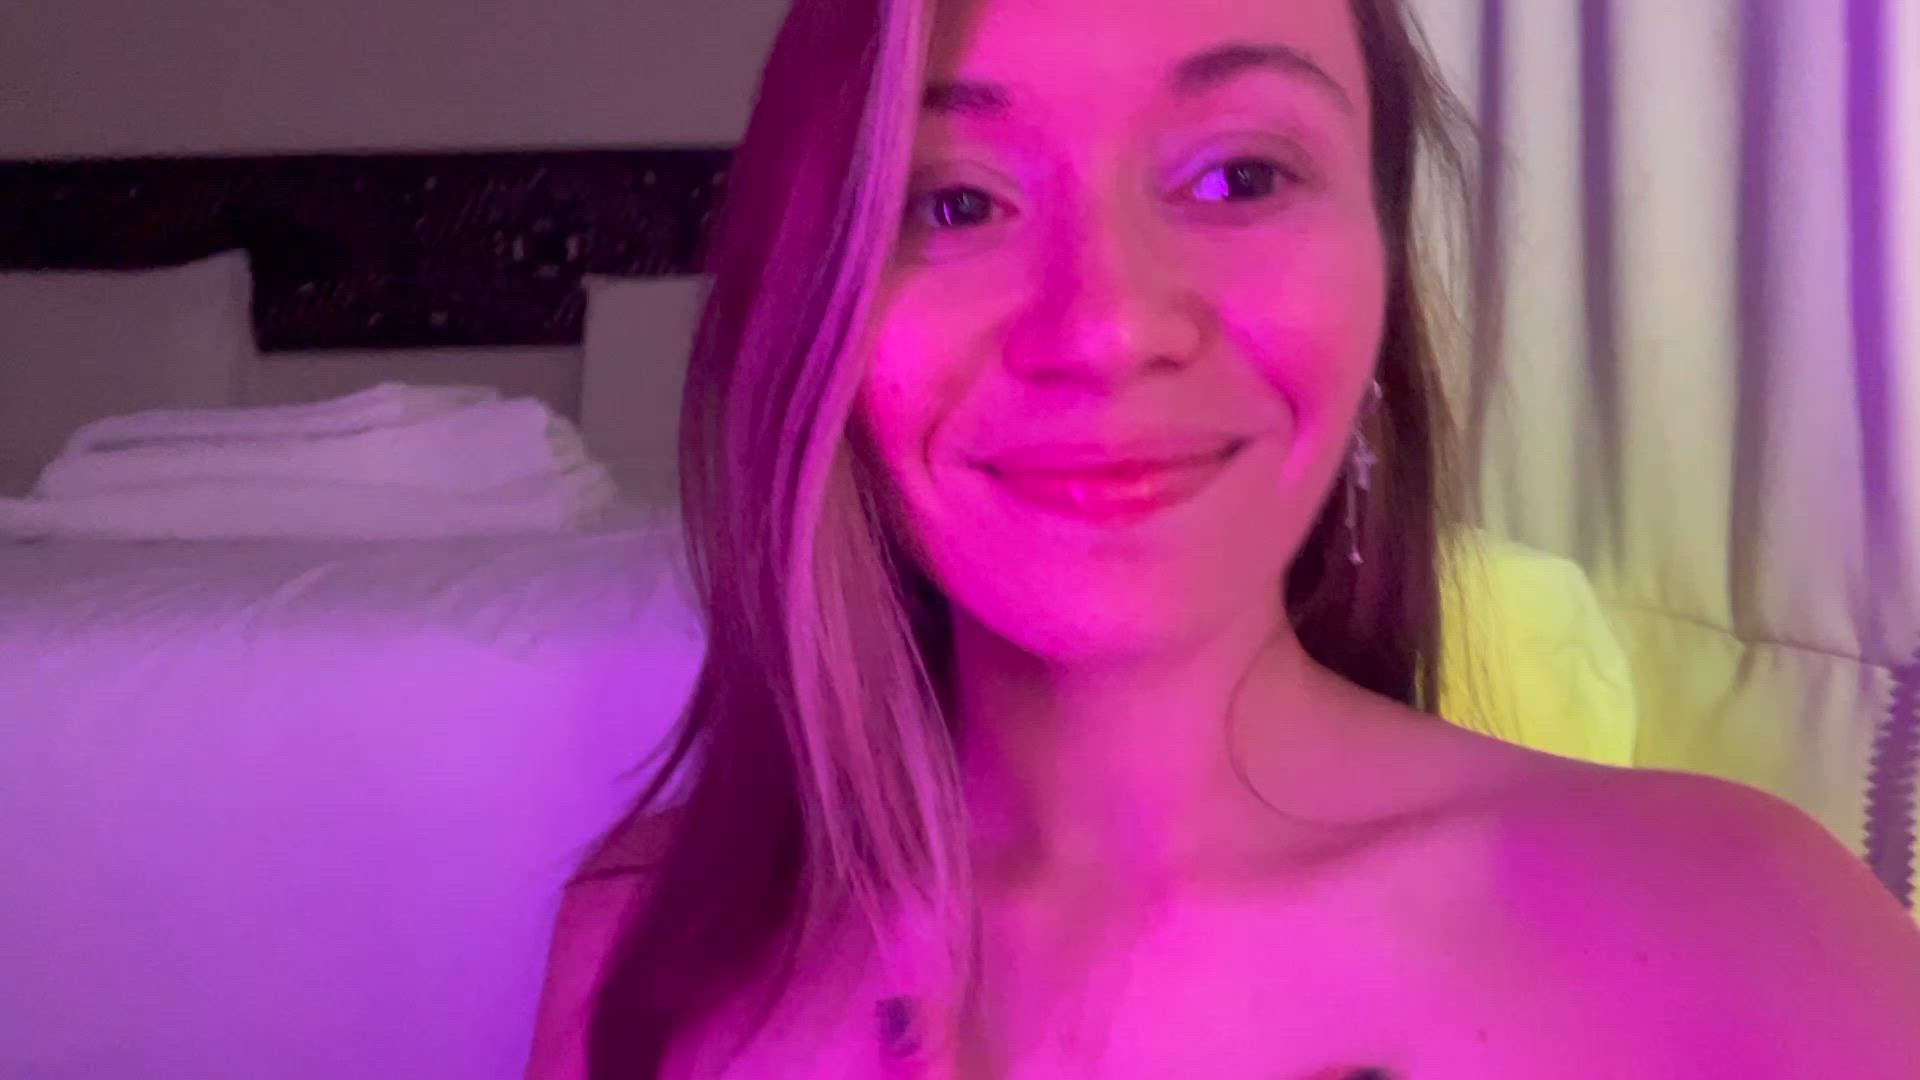 Tits porn video with onlyfans model ellcryssa <strong>@ellcrys</strong>